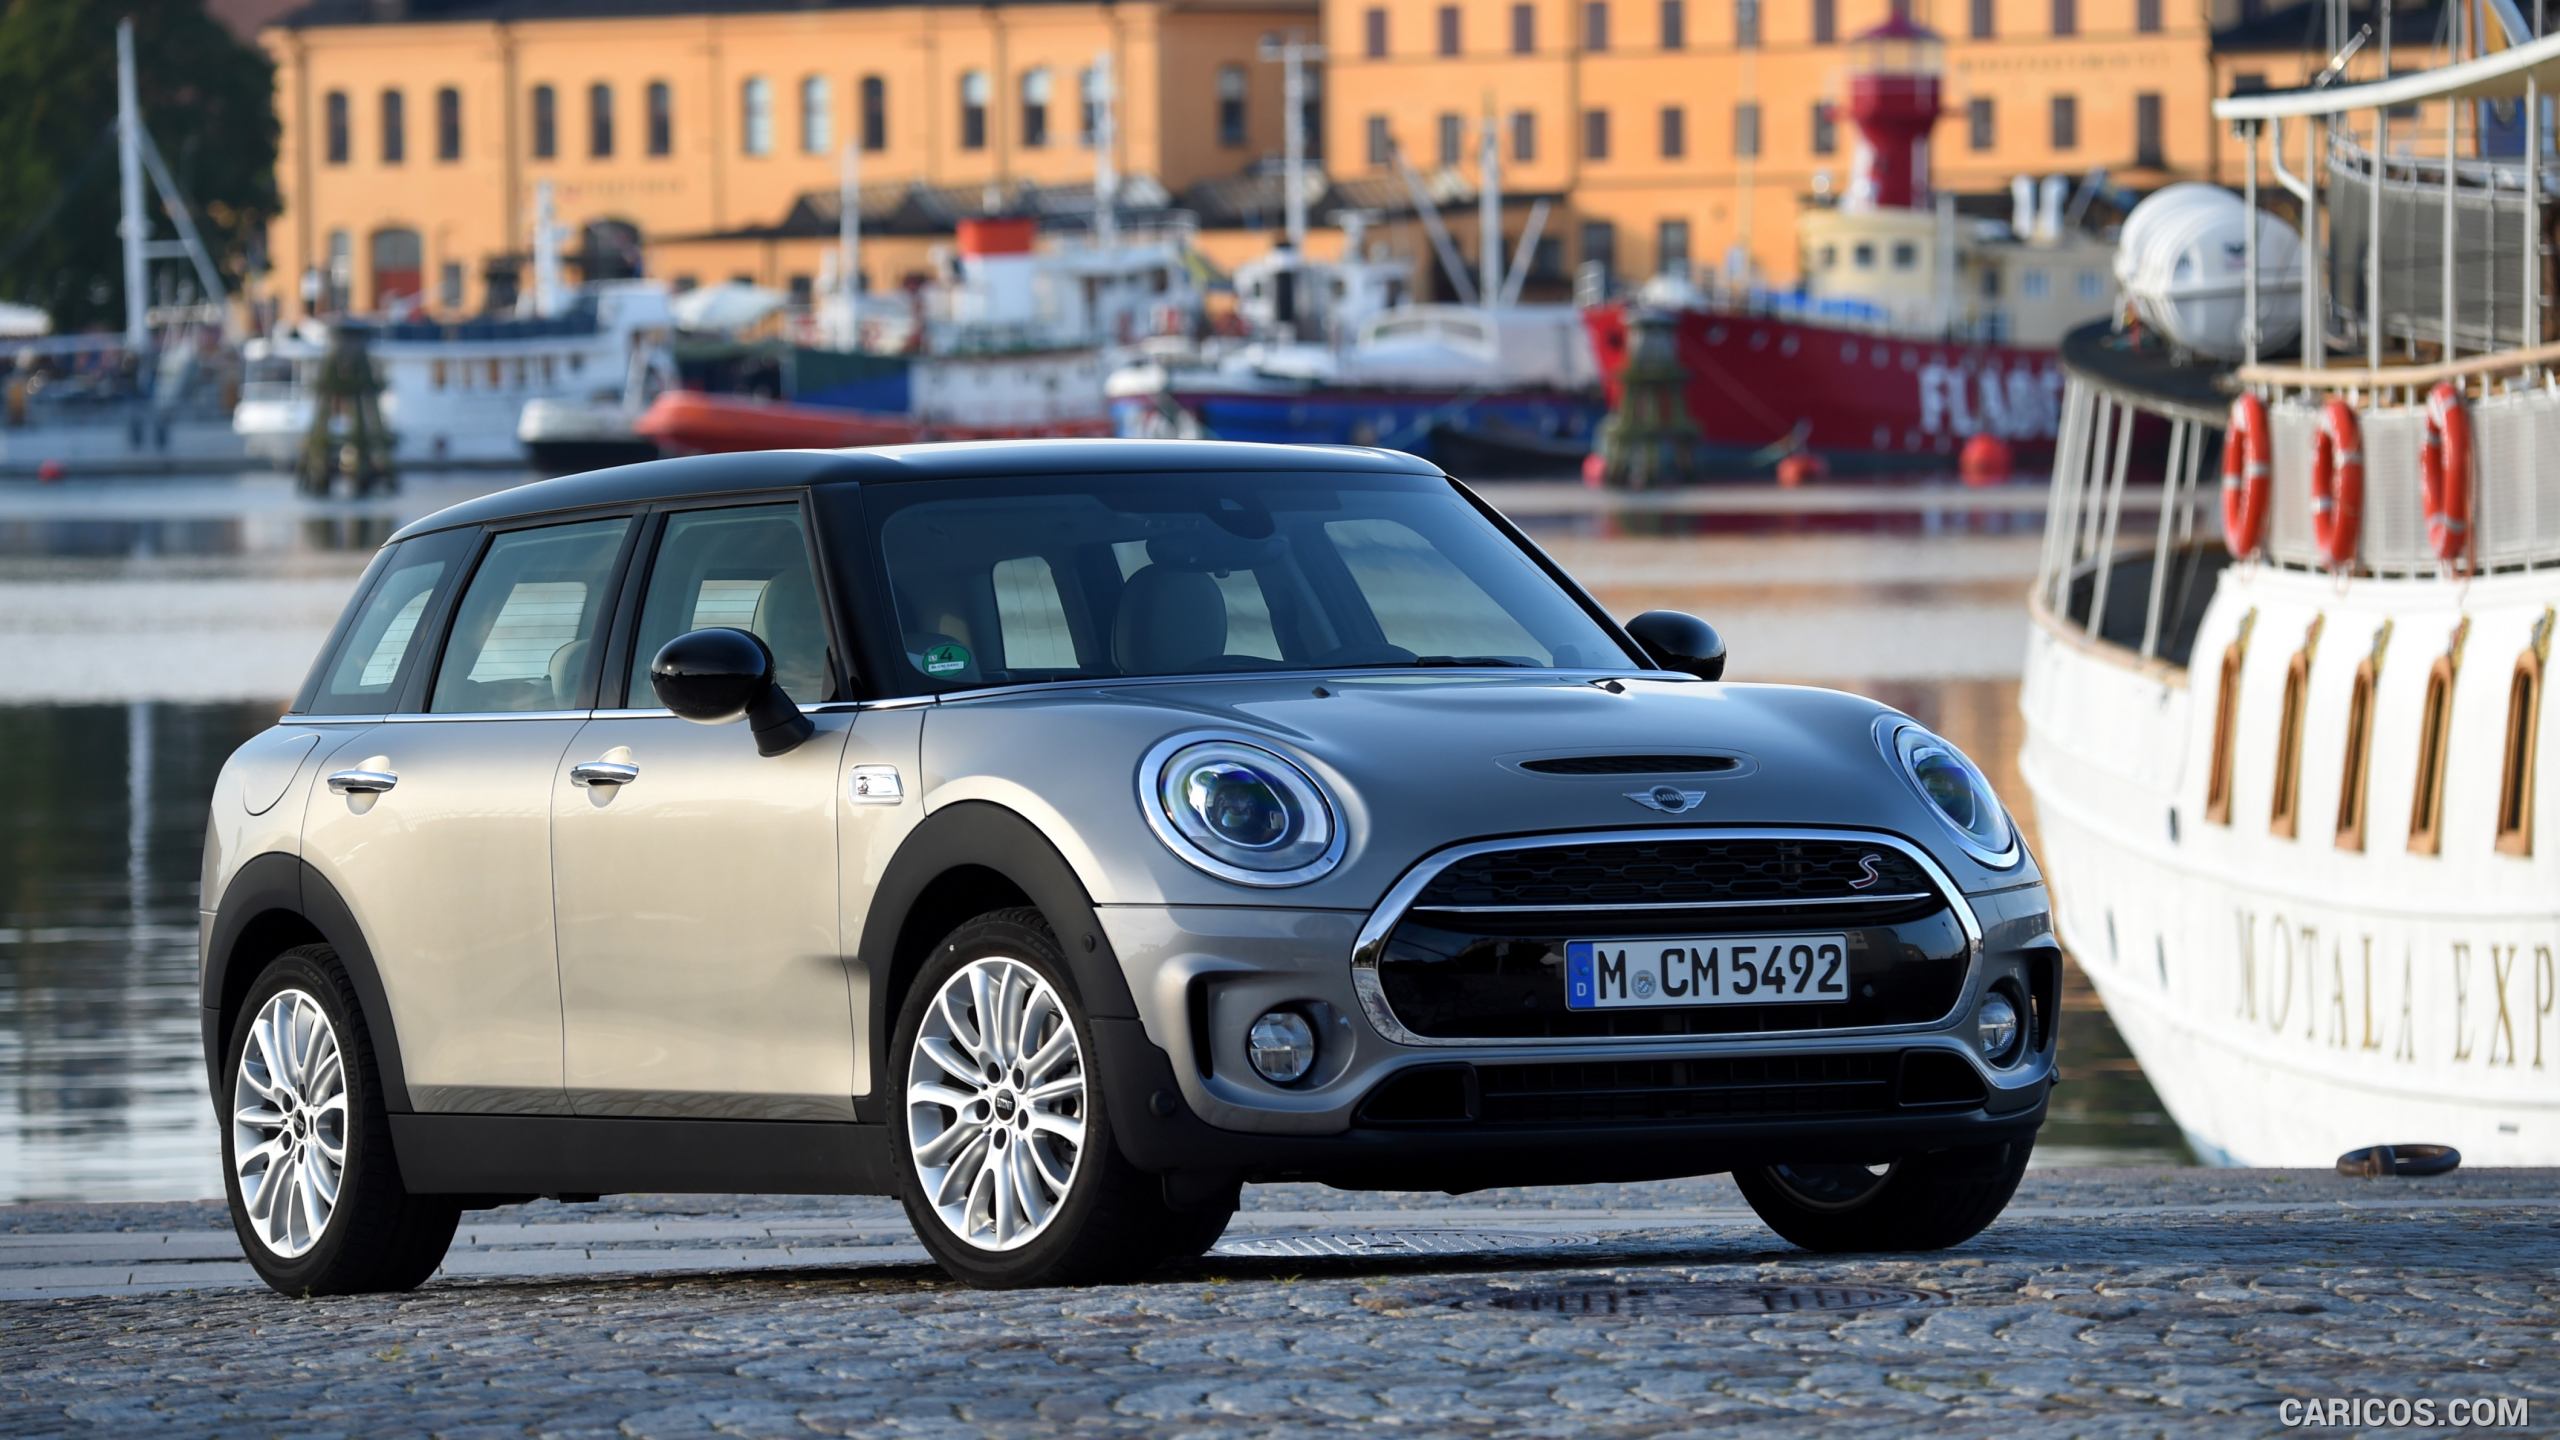 2016 MINI Cooper S Clubman in Metallic Melting Silver - Front, #165 of 380